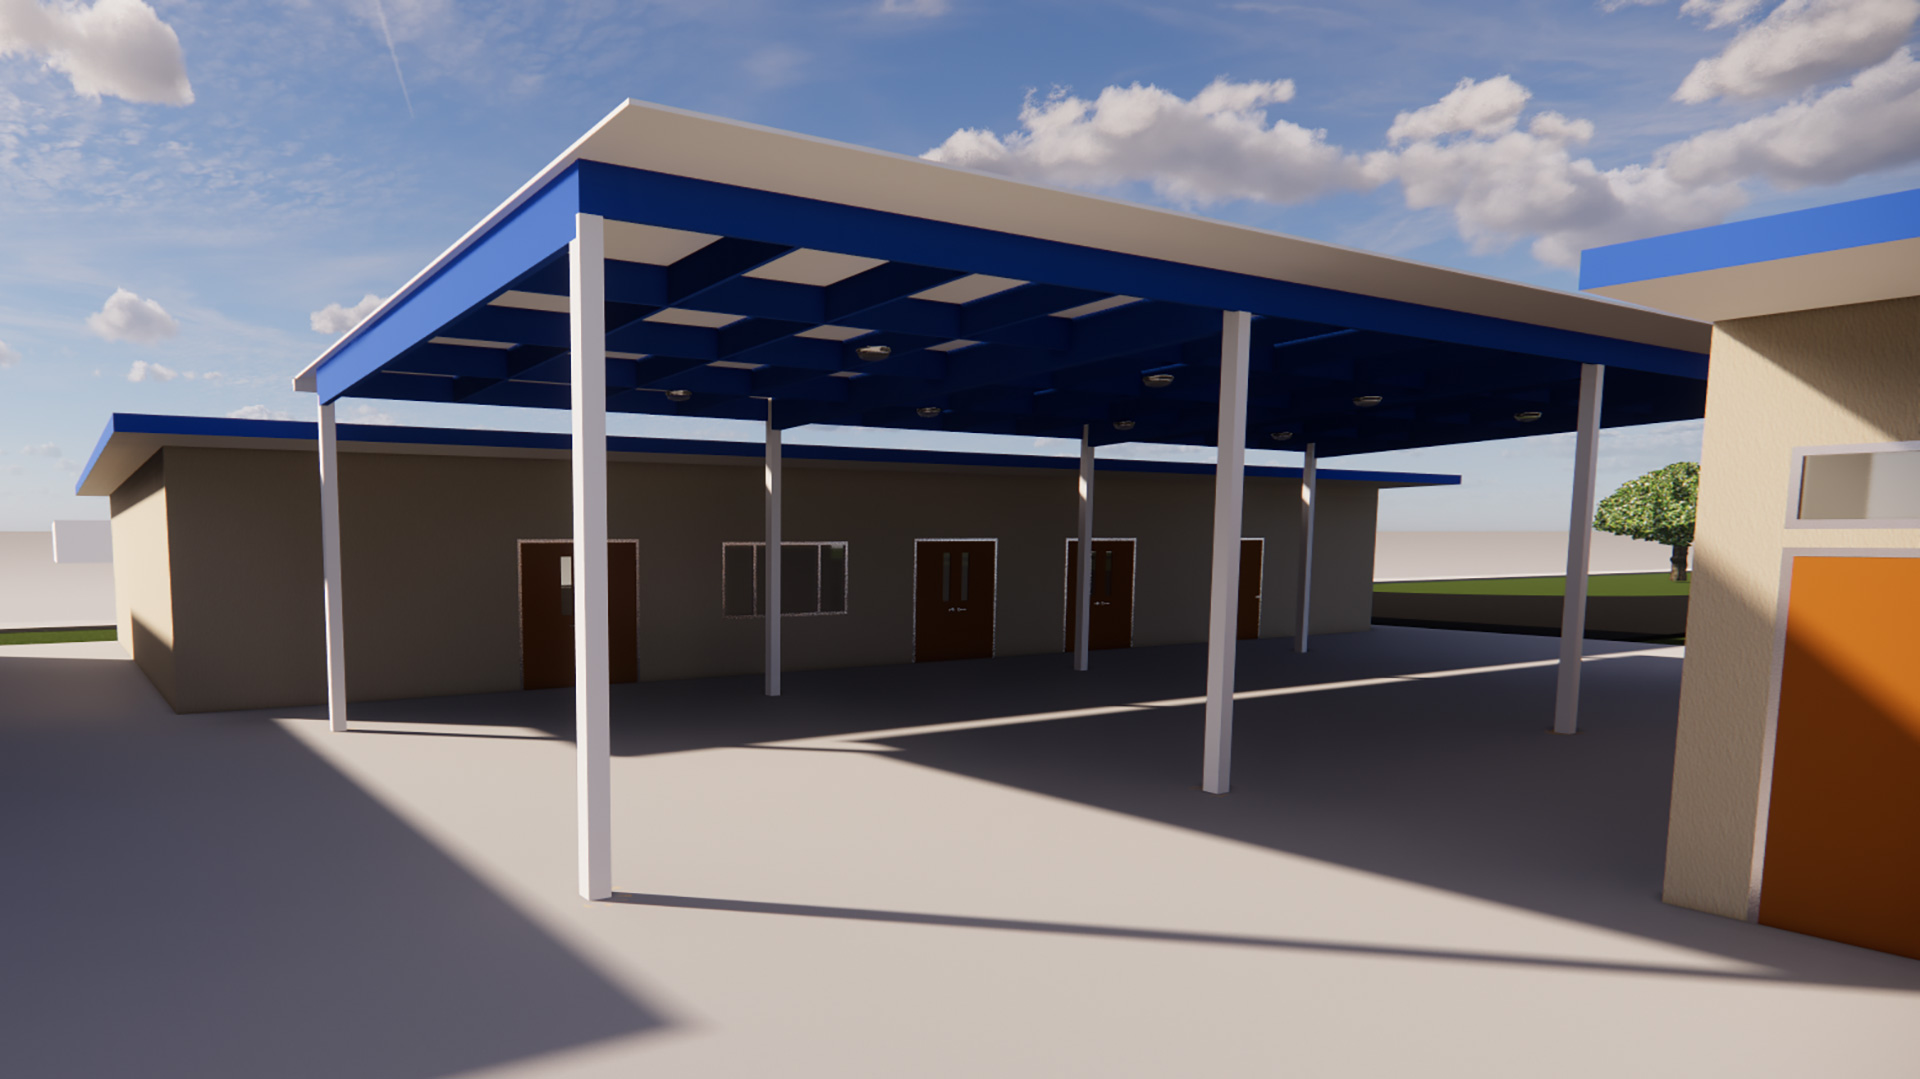 Early render of shade structure, with white poles and roof, with blue supports.